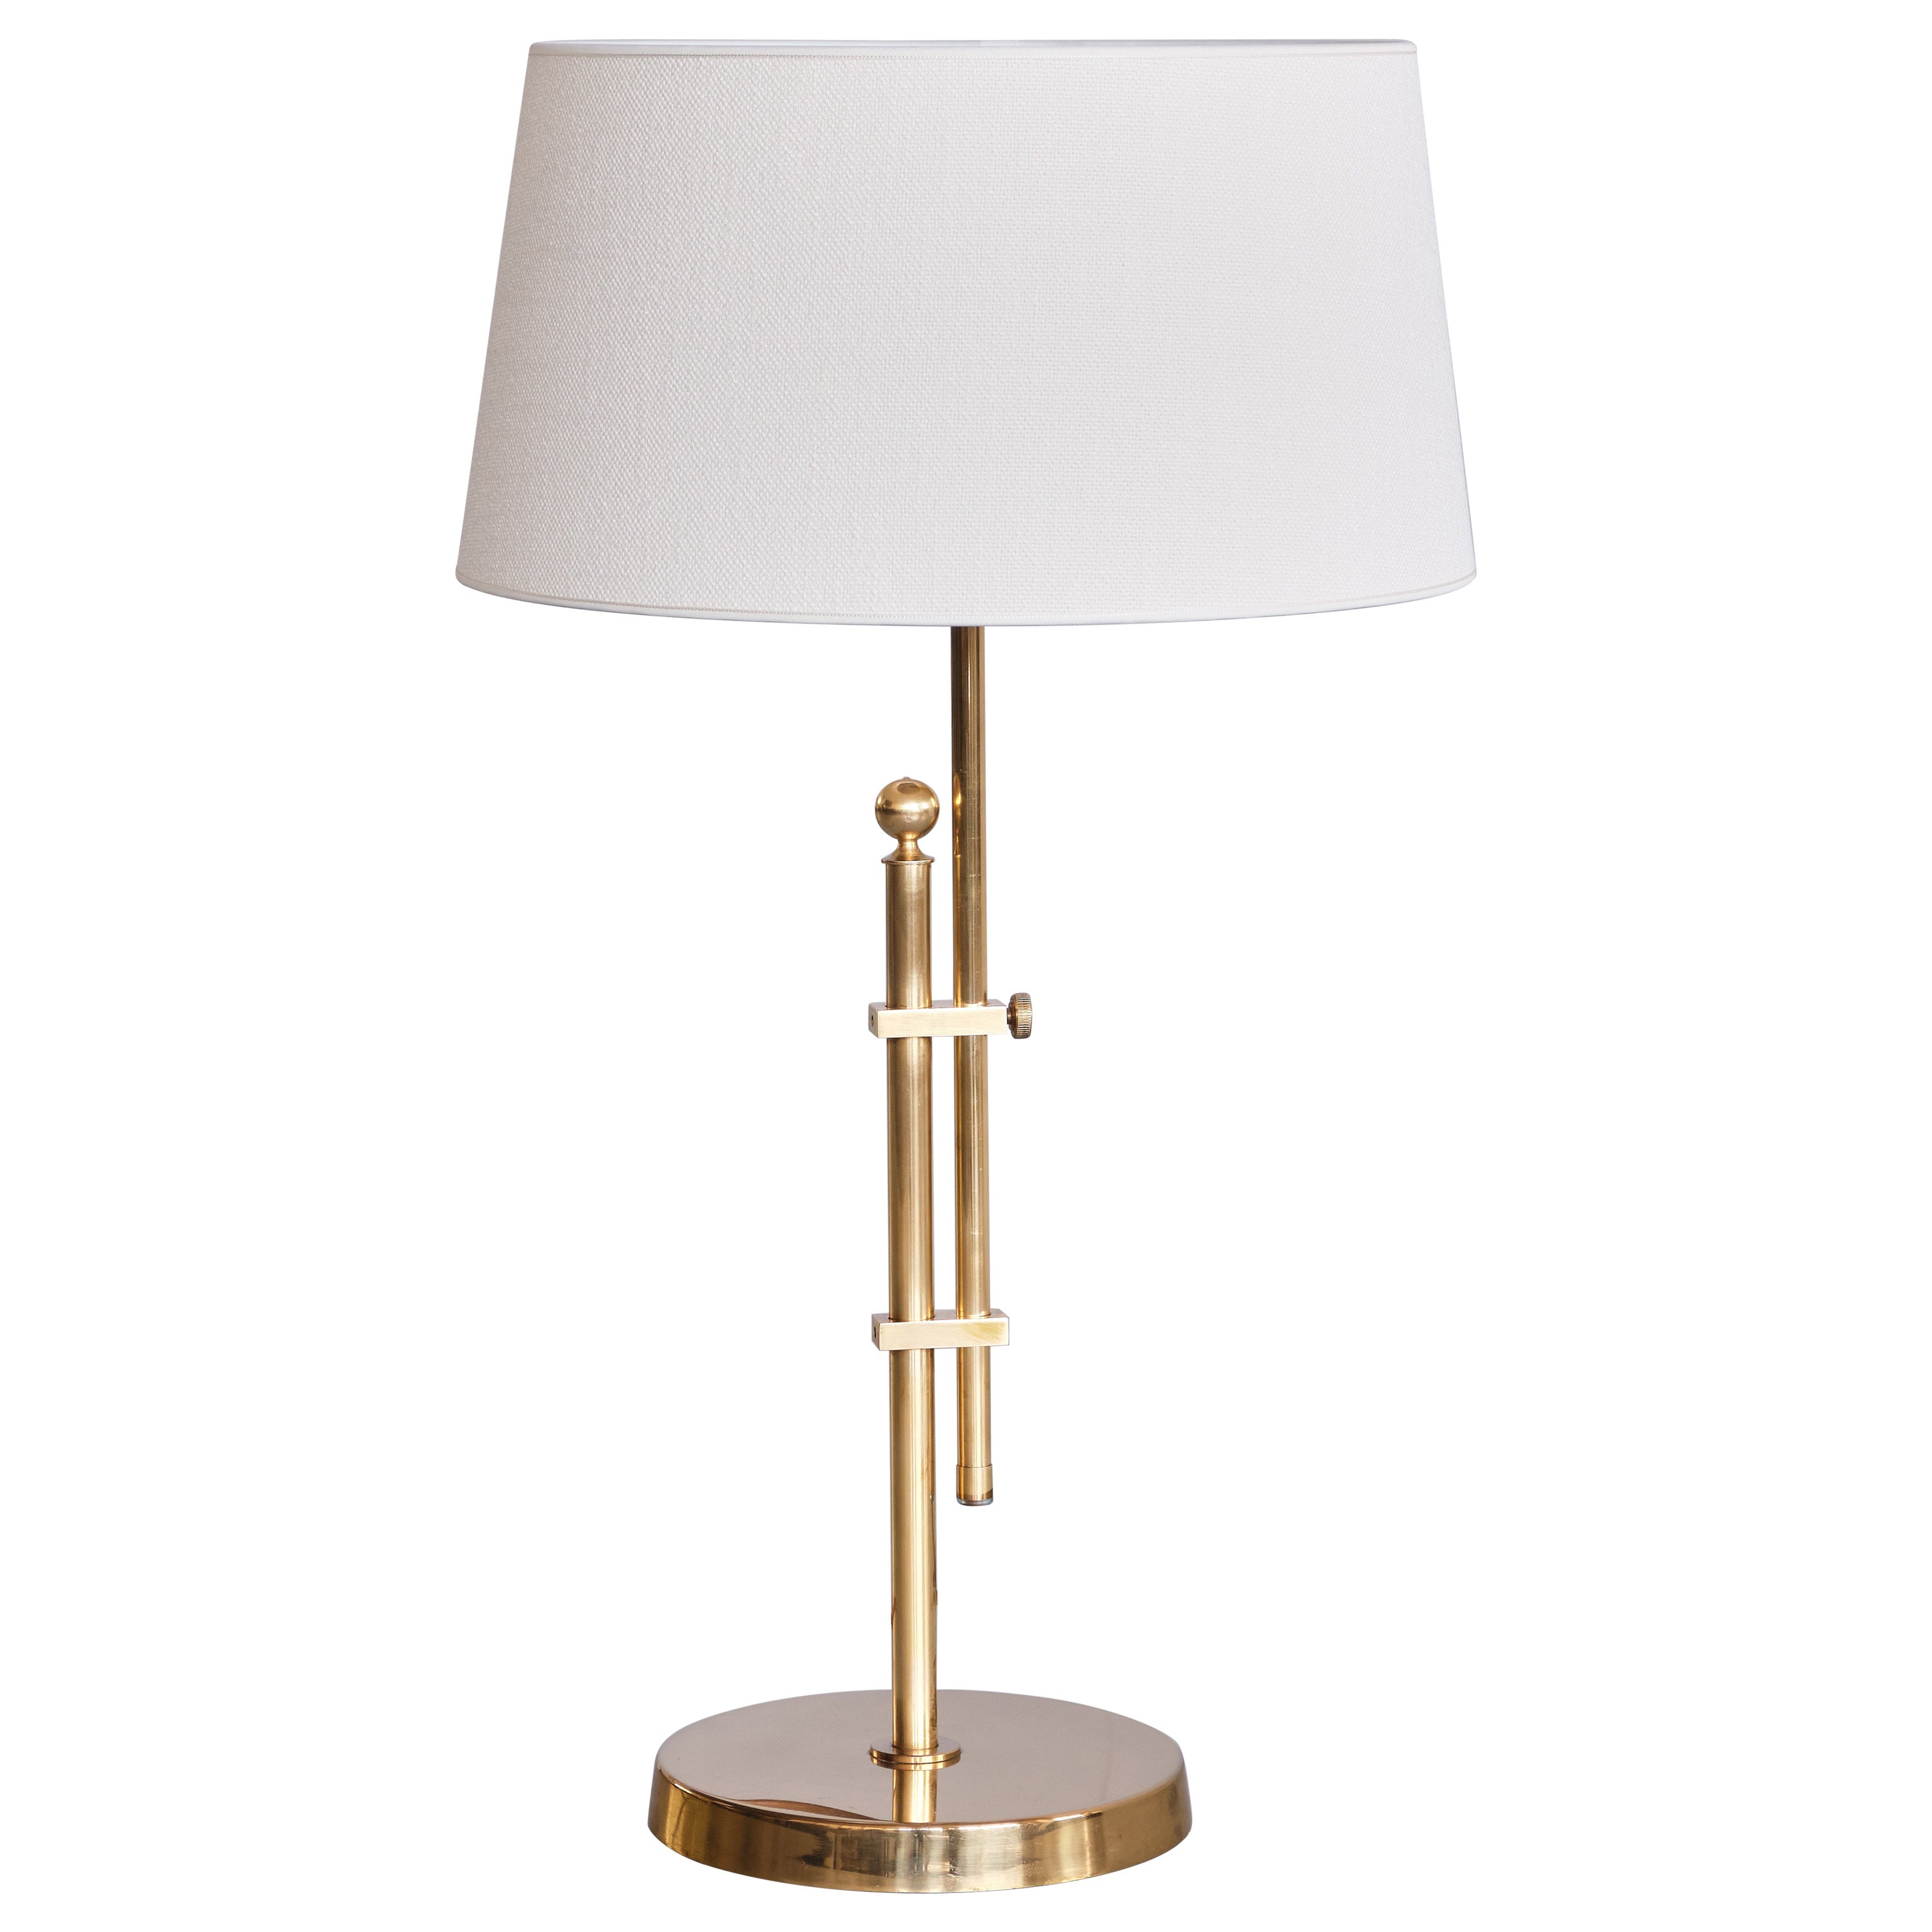 Bergboms B-131 Height Adjustable Table Lamp in Brass, Sweden, 1950s For Sale